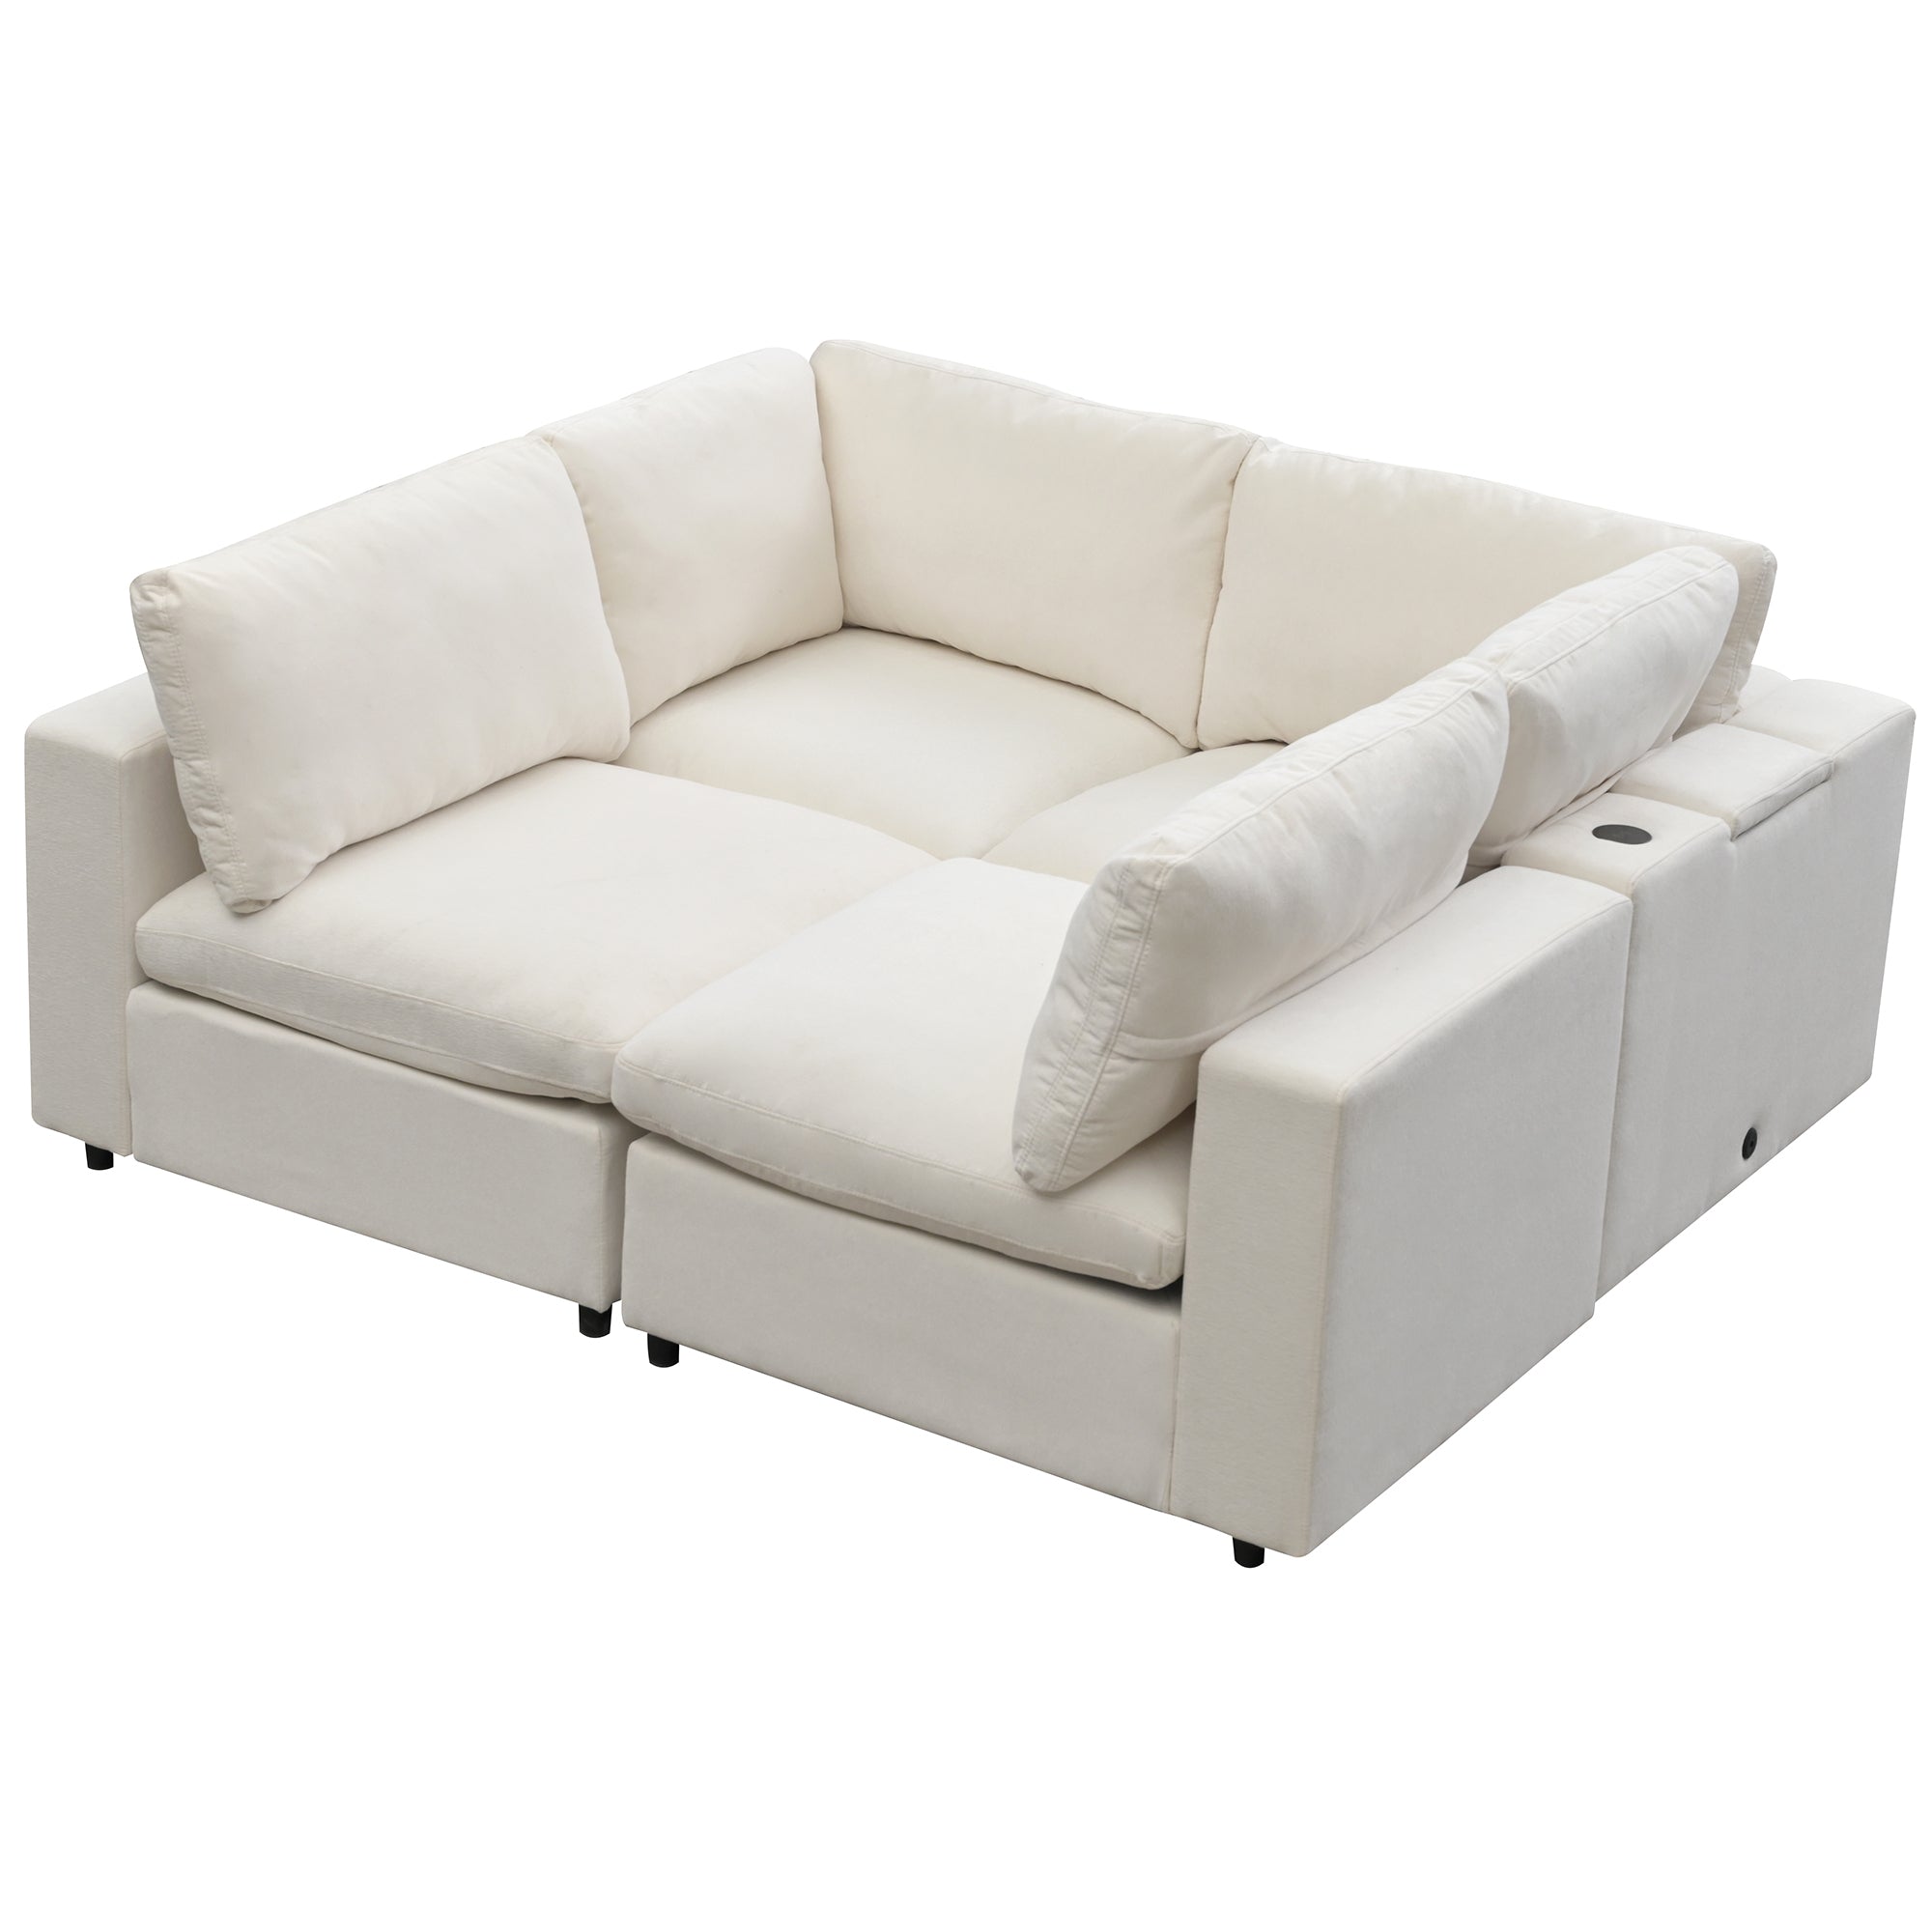 Beckham Linen 4 Seater Modular Sectional Sofa with USB Charge Ports, Wireless Charging and Built-in Bluetooth Speaker